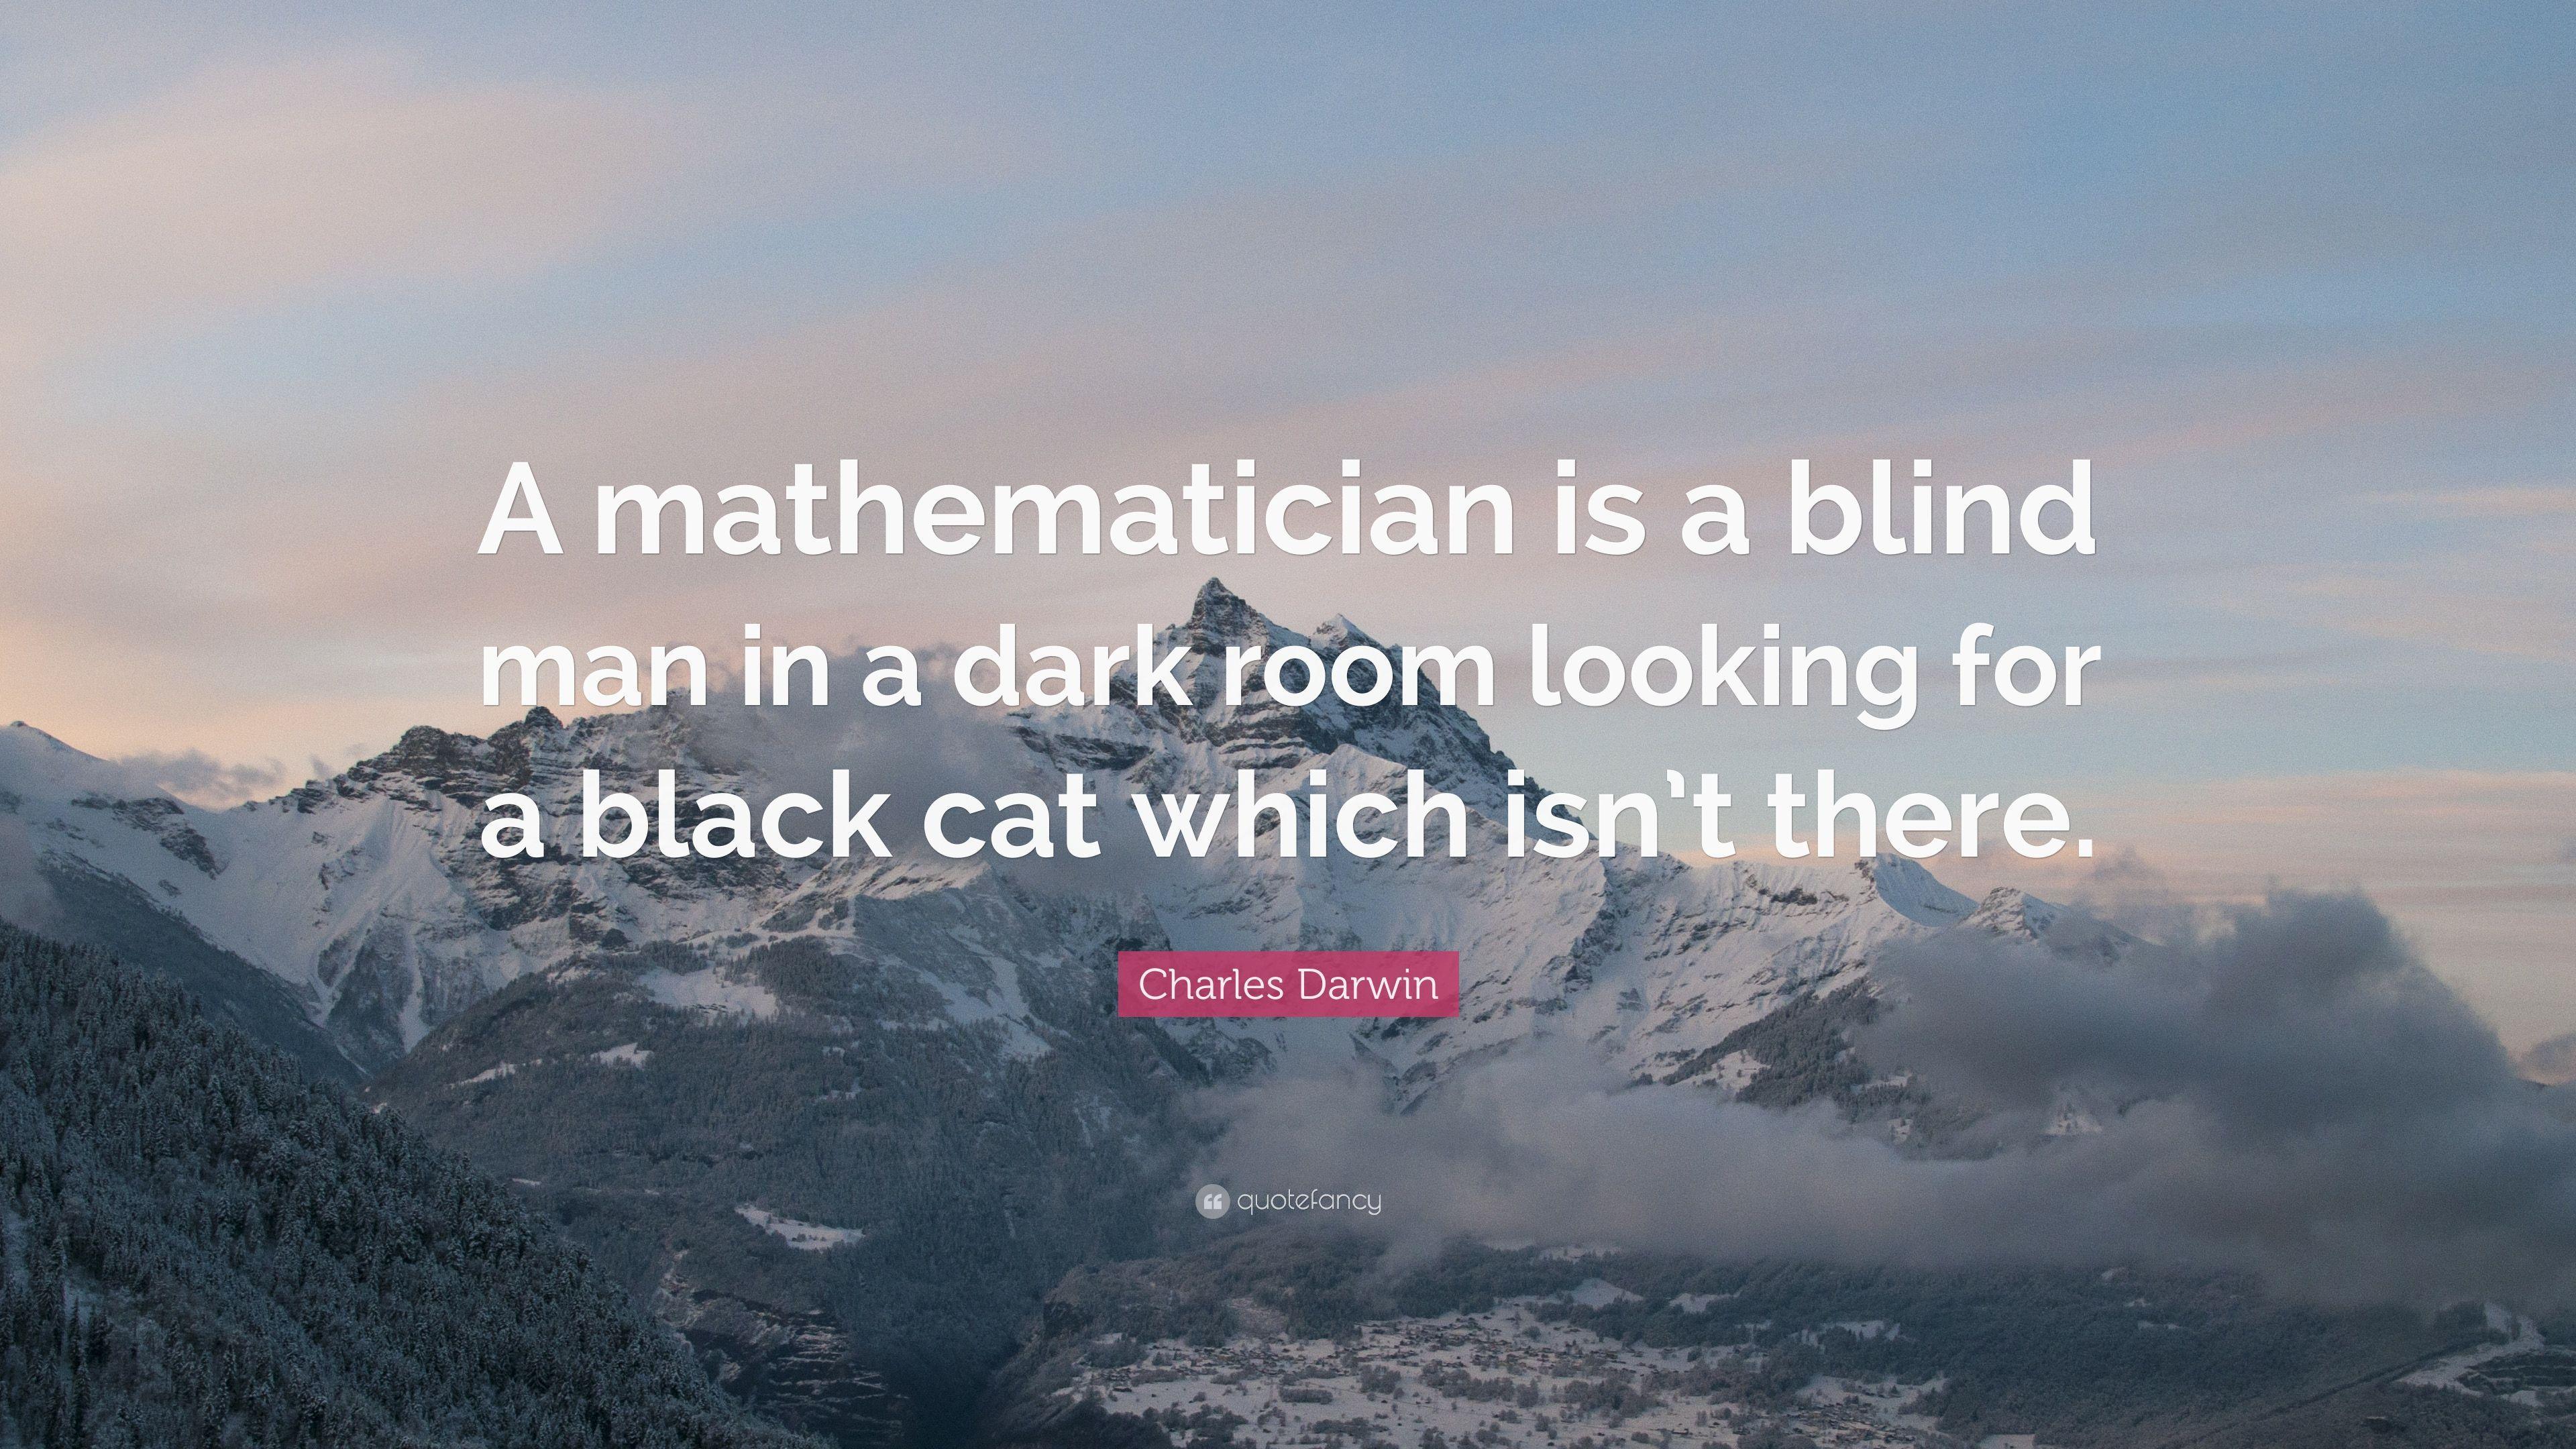 Charles Darwin Quote: “A mathematician is a blind man in a dark